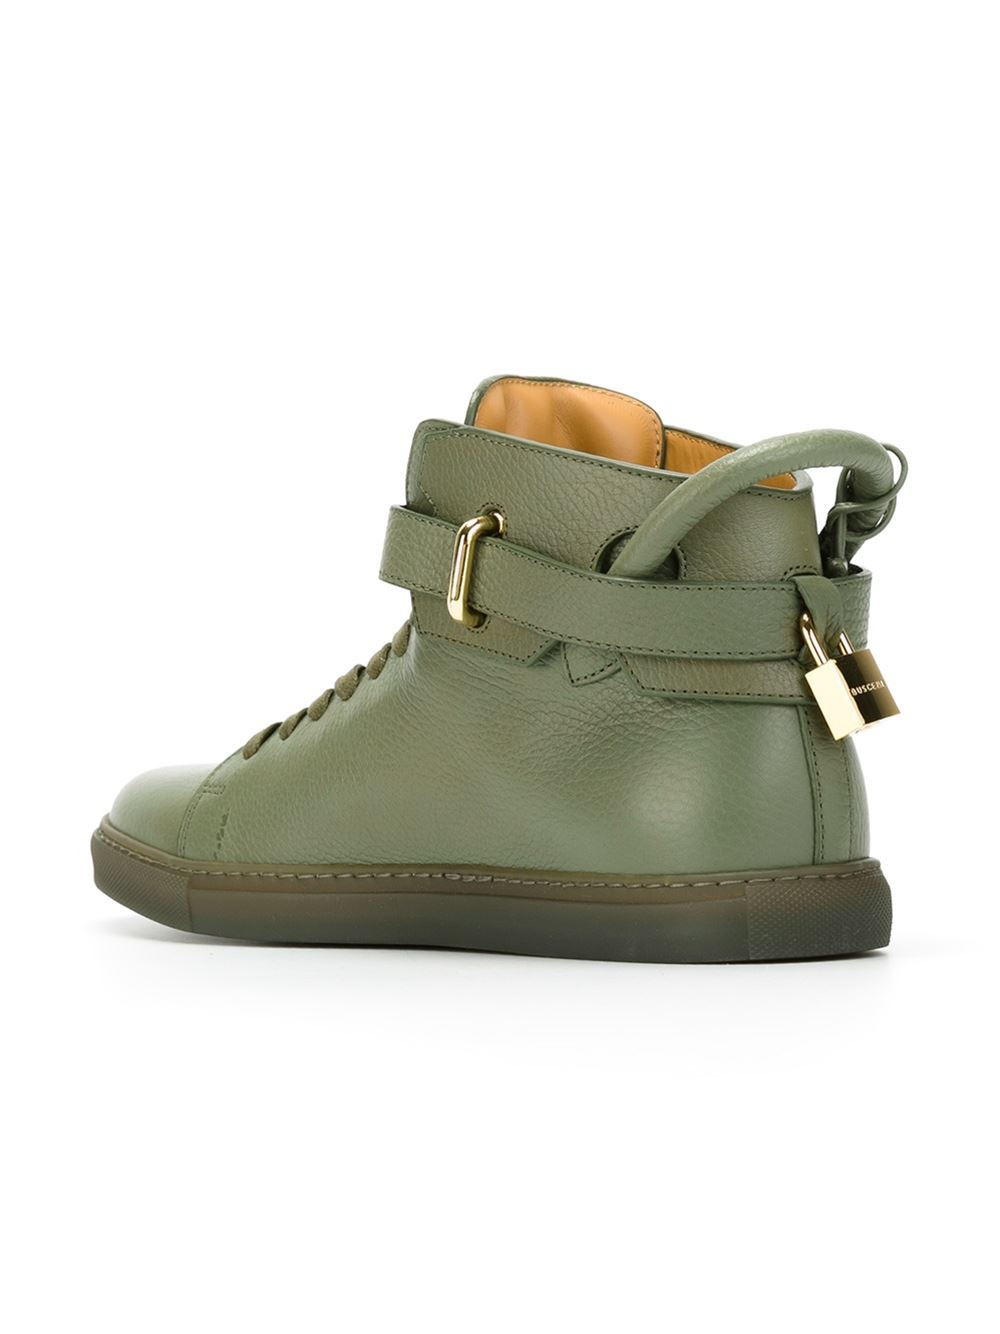 Buscemi Padlock-Detail Leather Sneakers in Green for Men | Lyst